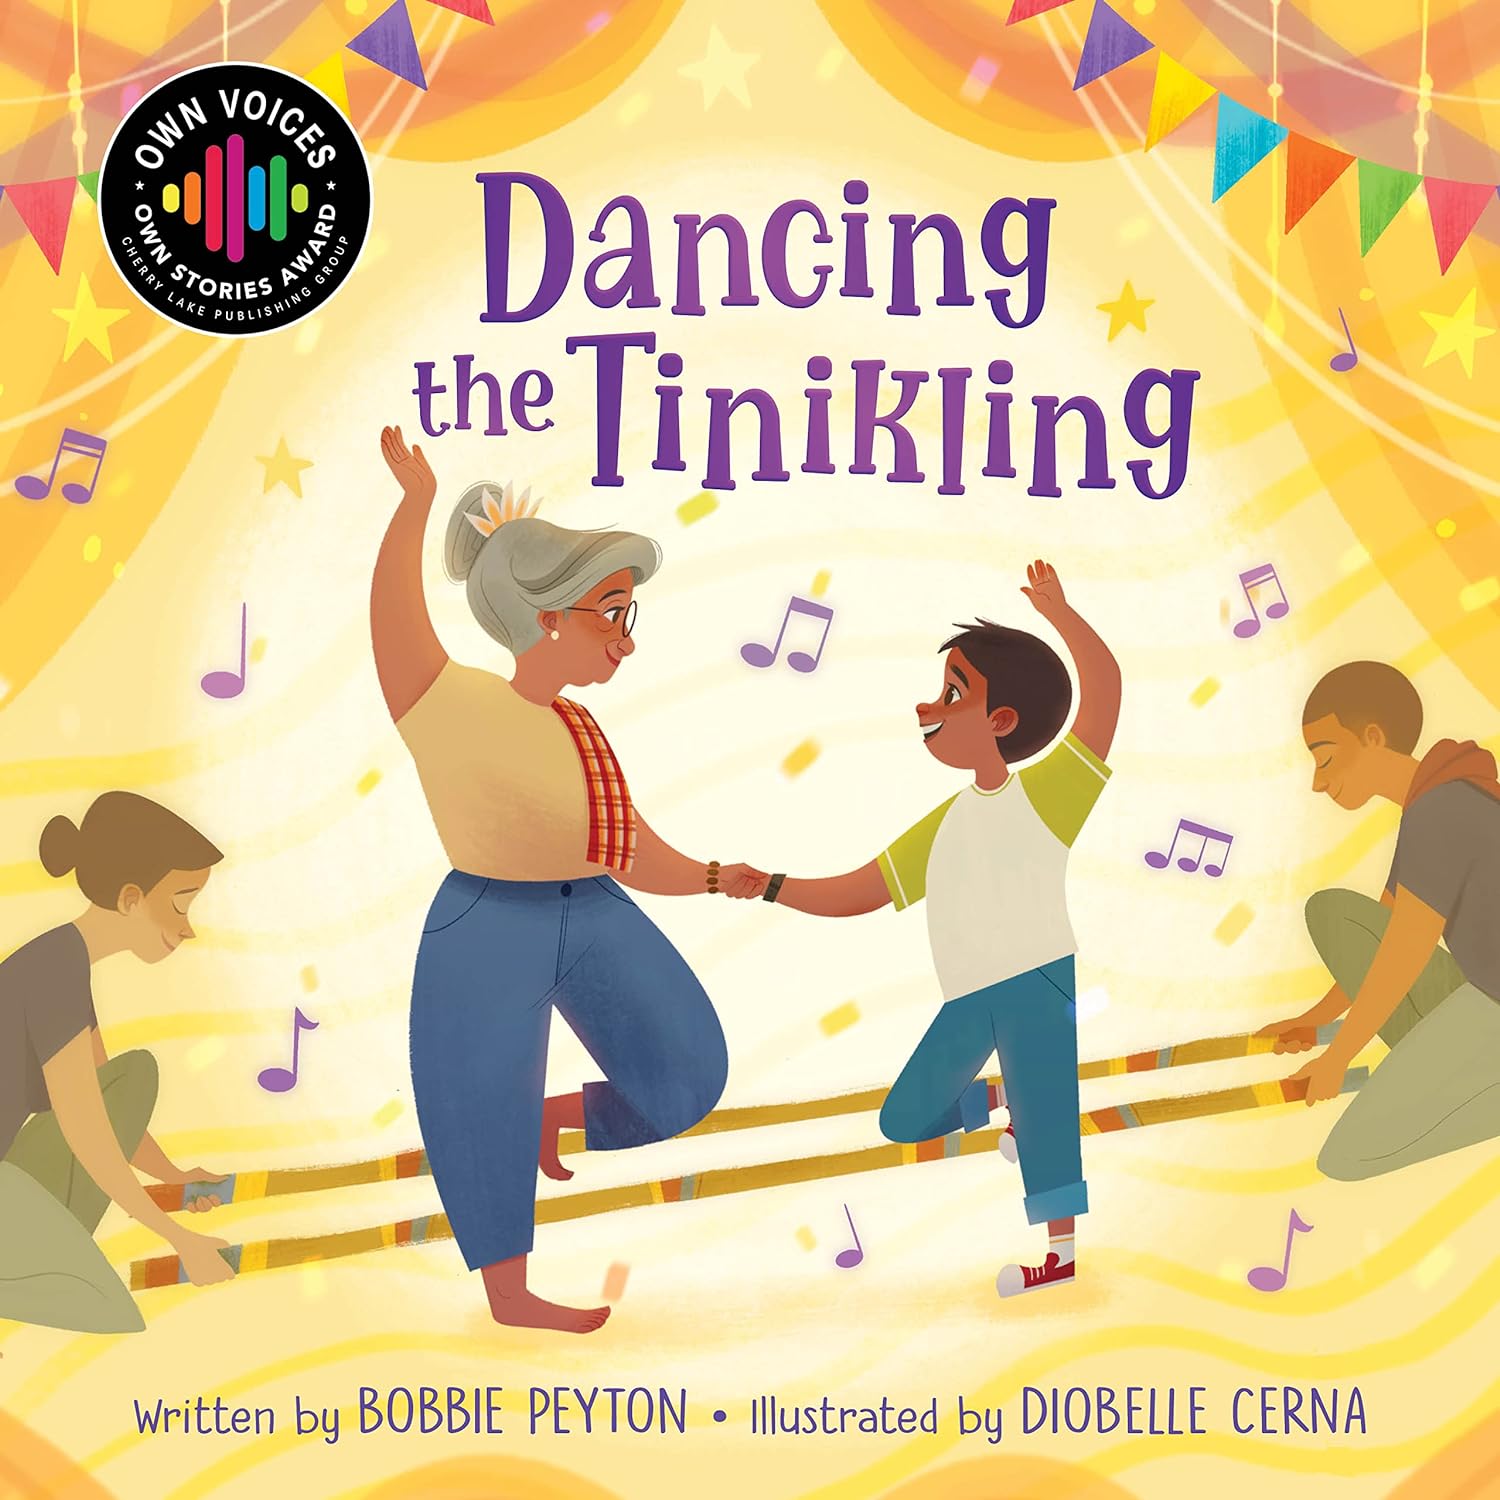 Dancing the Tinikling - own voices Filipino American children's book